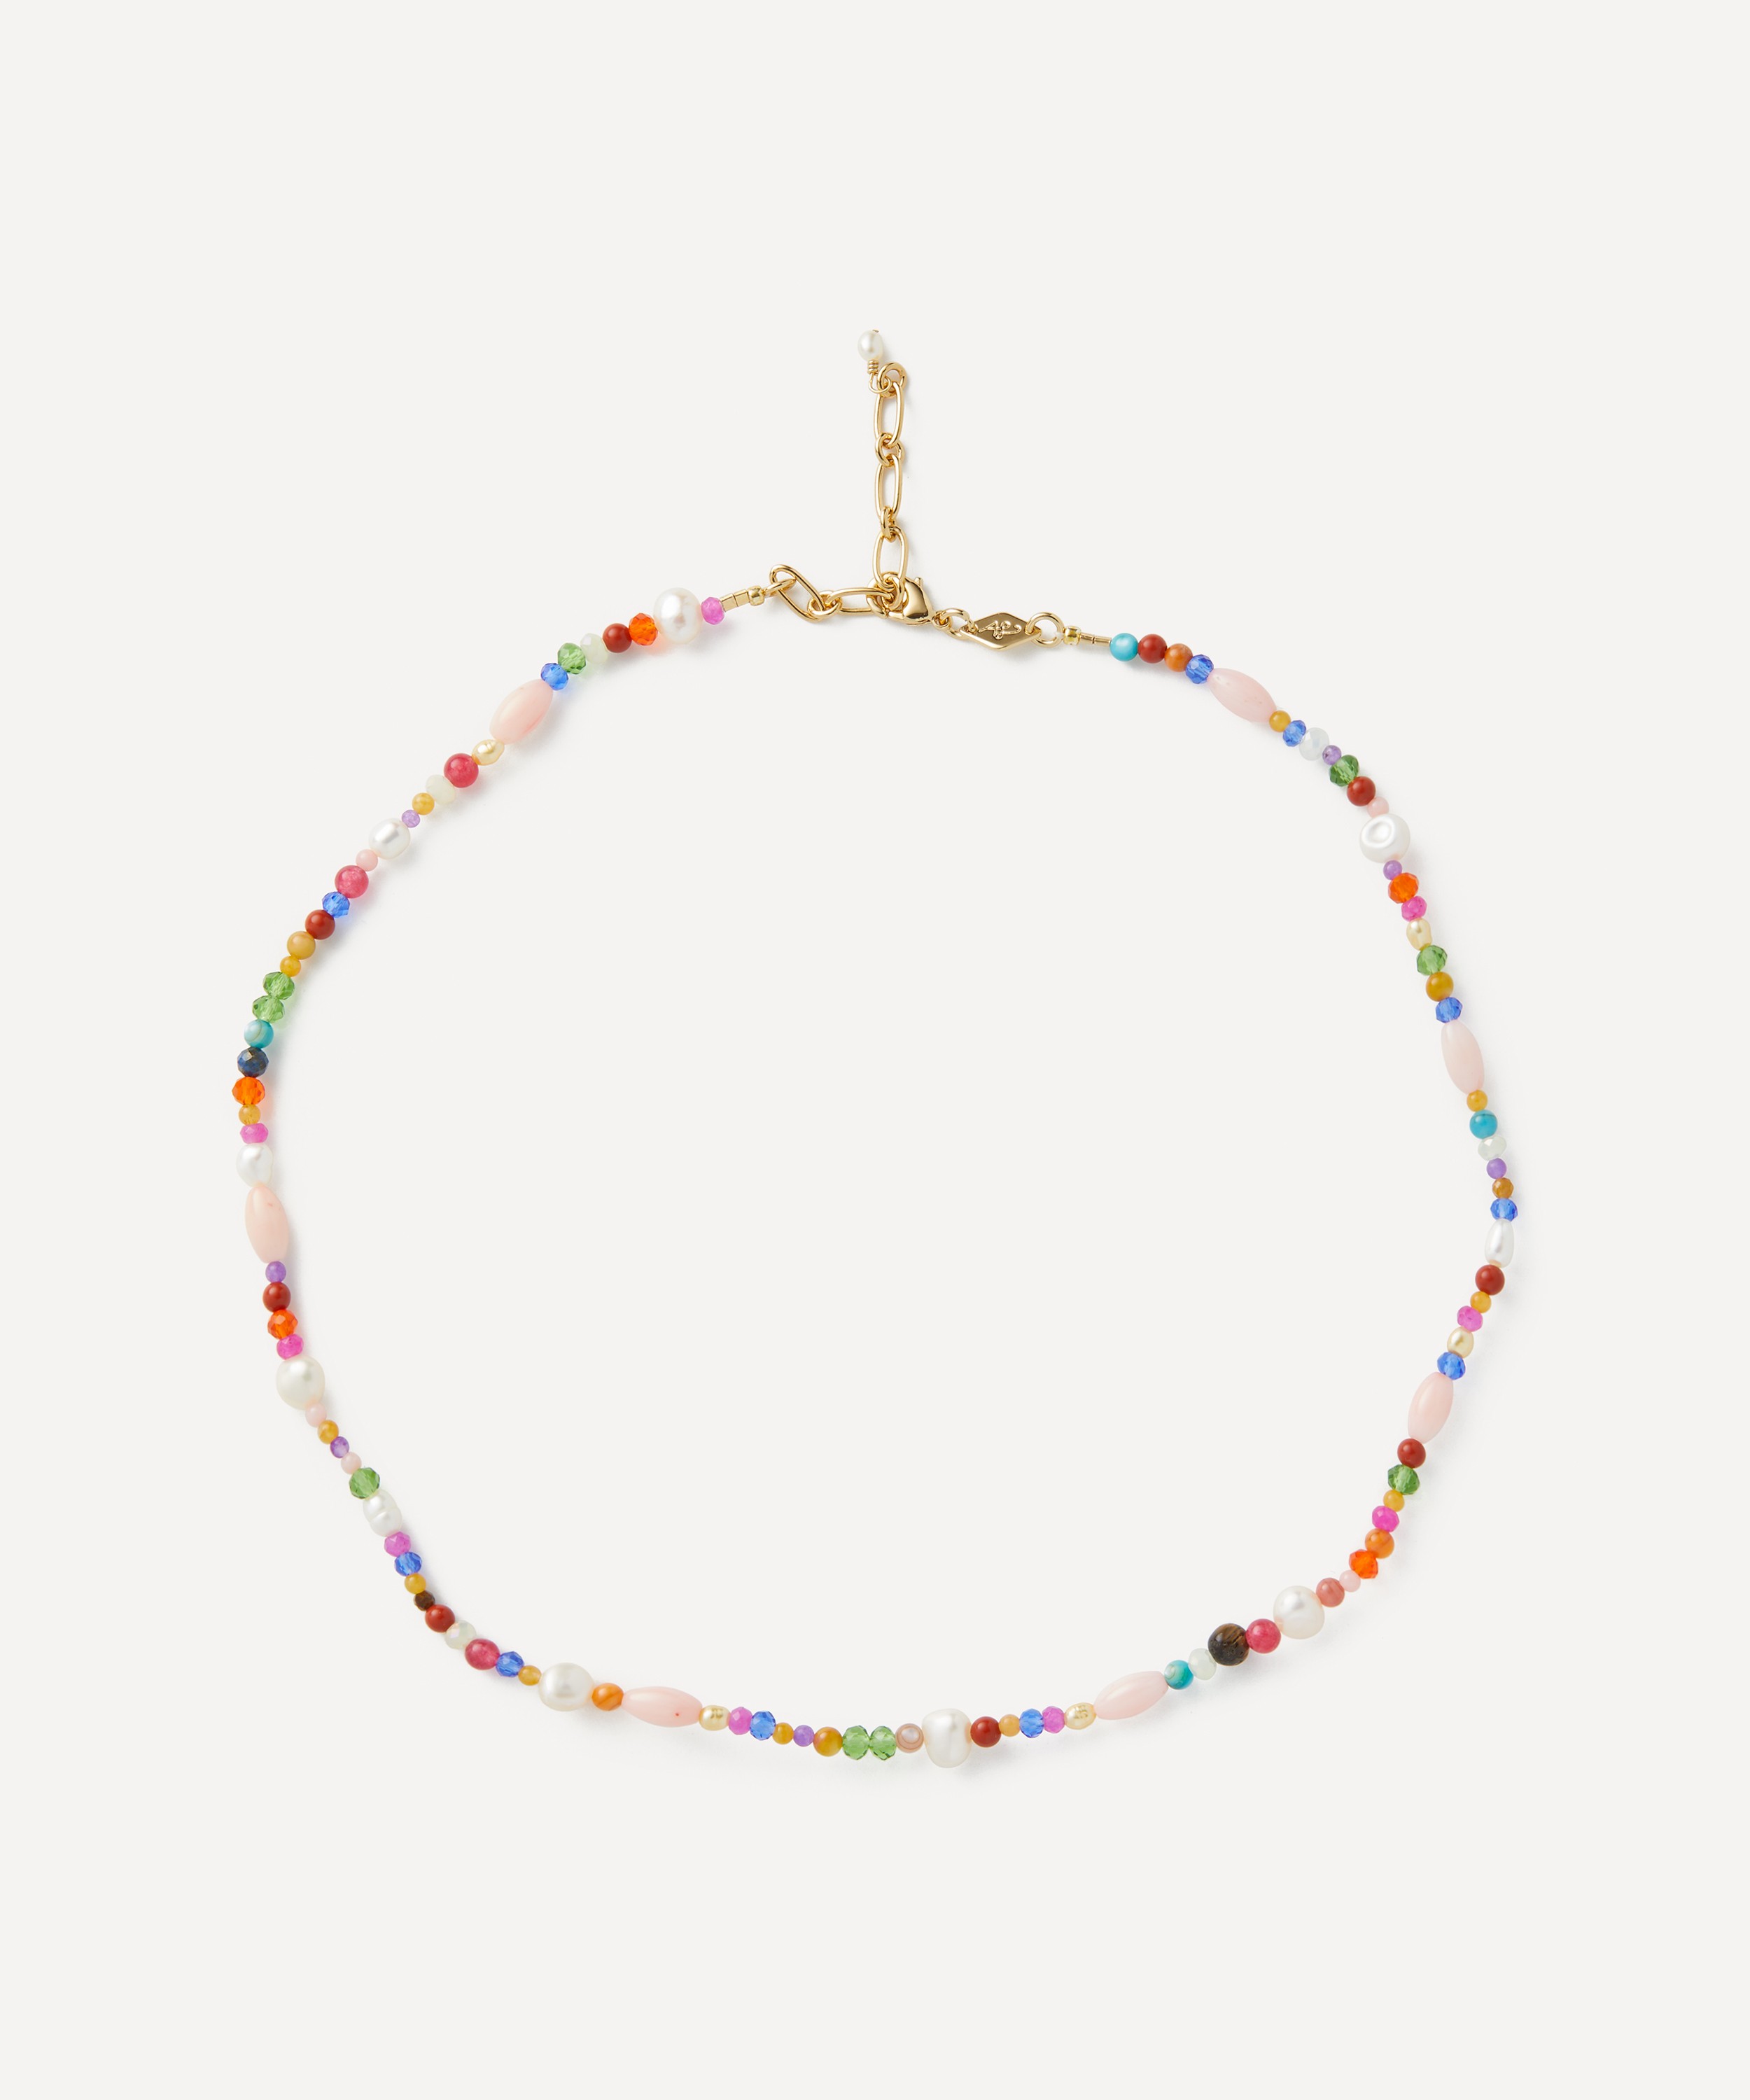 ANNI LU - 18ct Gold-Plated Glamstone Bead Necklace